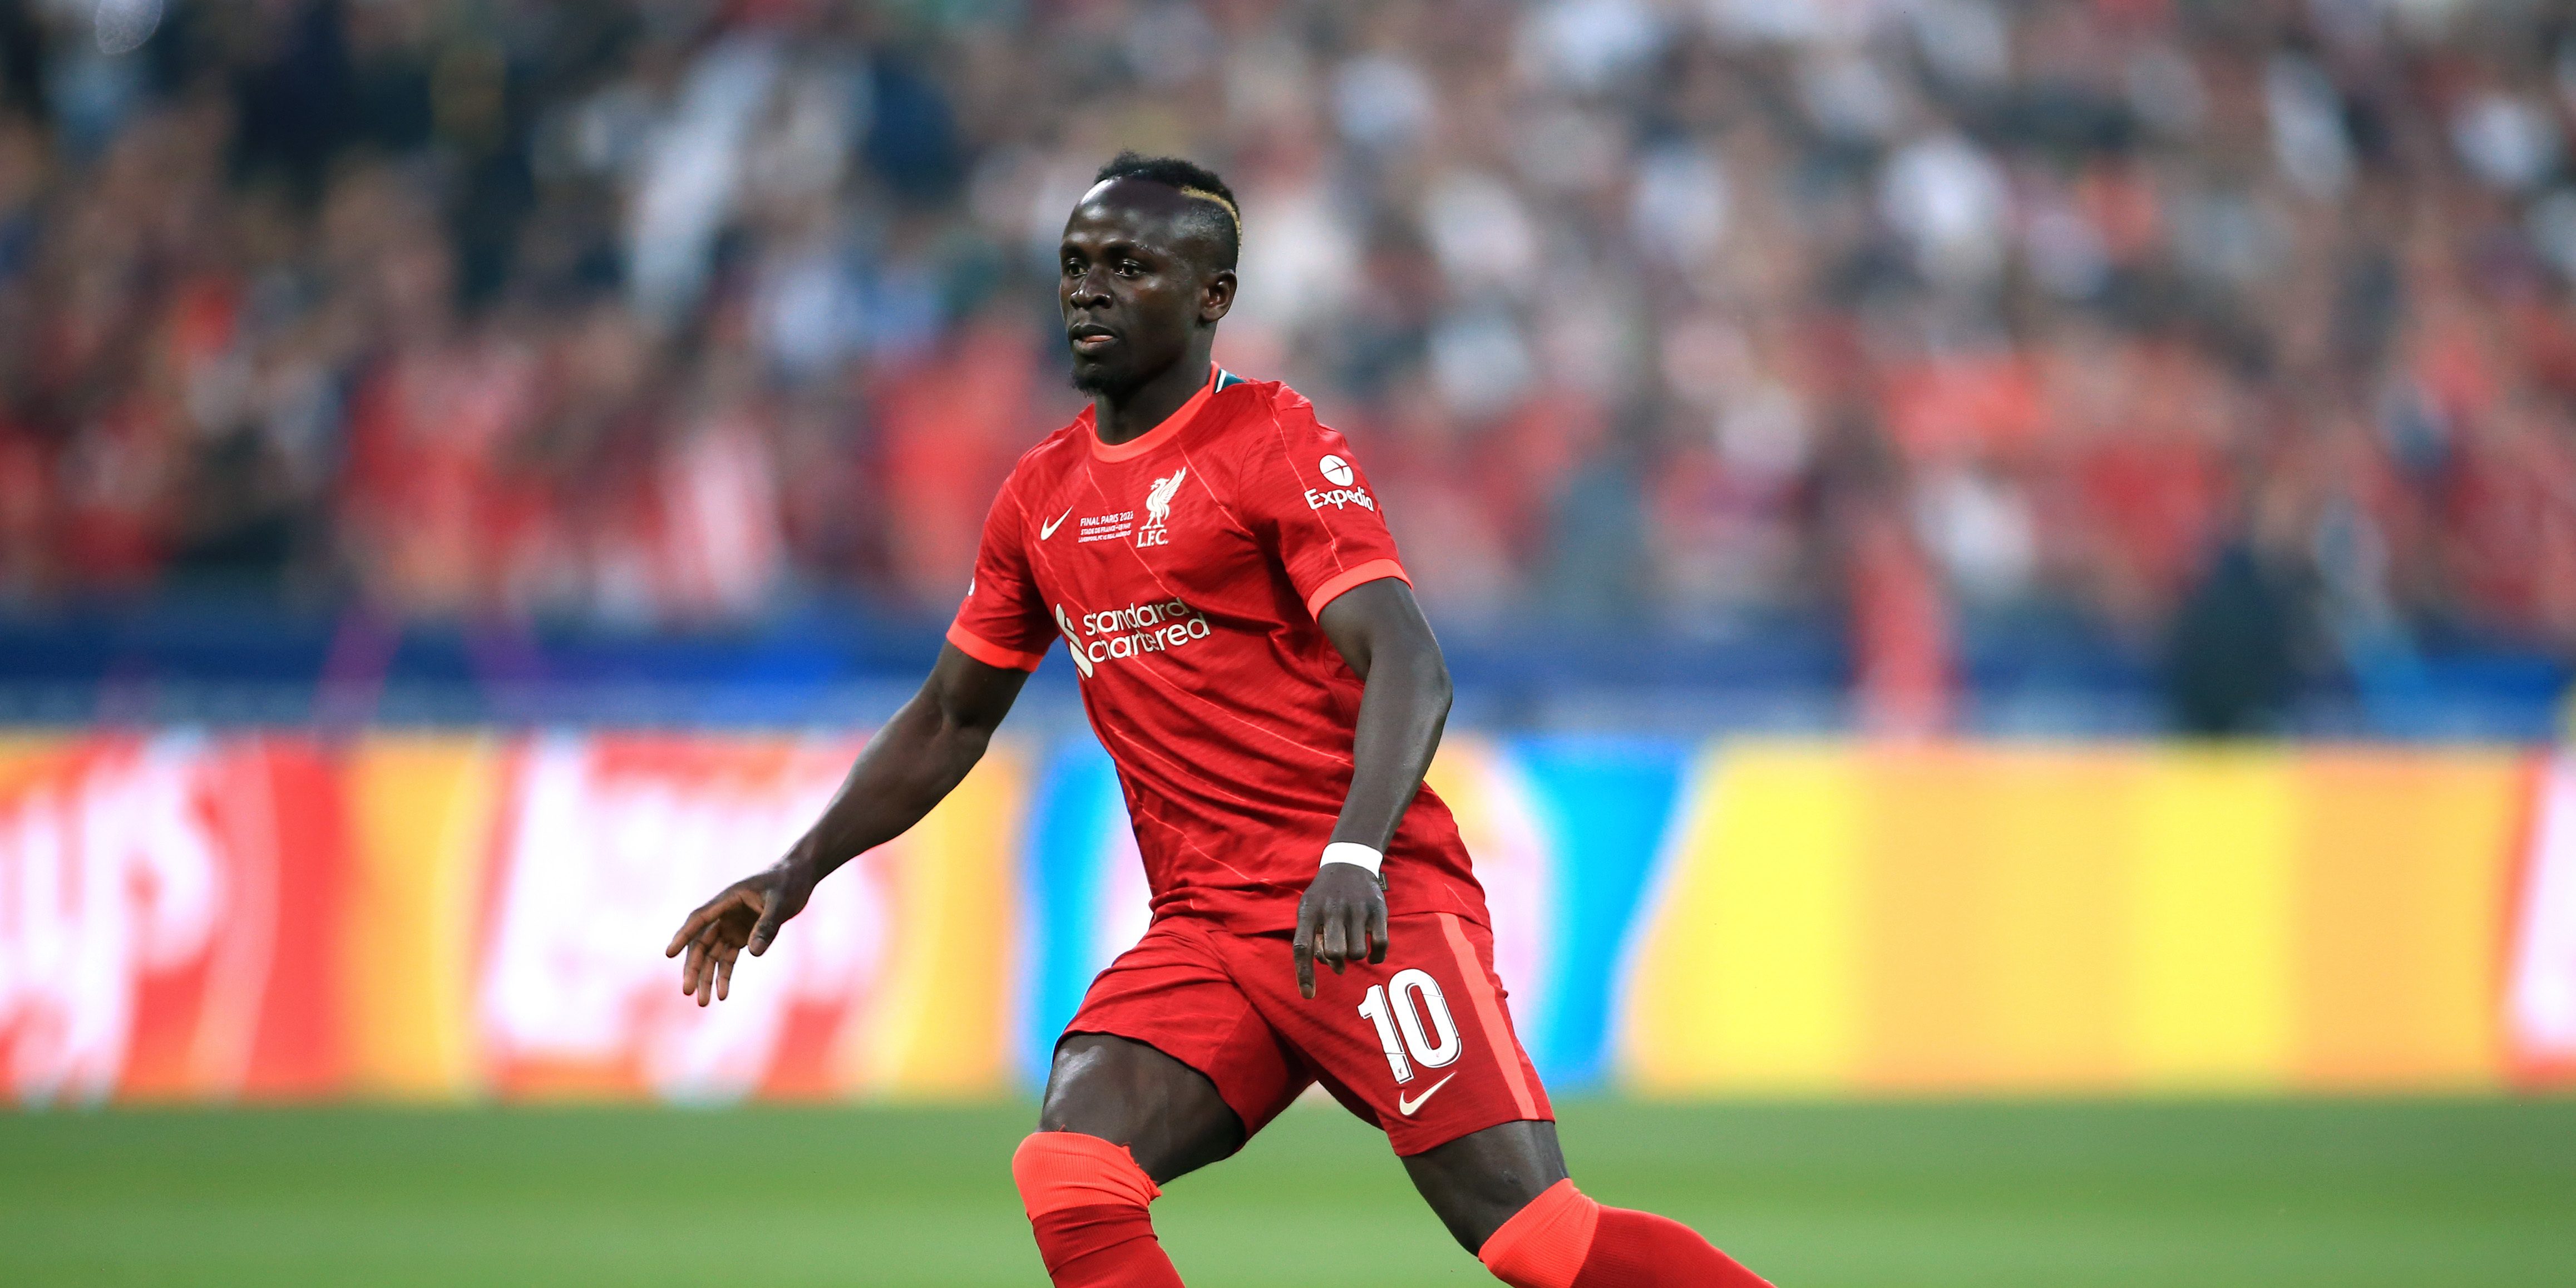 Report: Sadio Mane to Leave Liverpool After Six Seasons